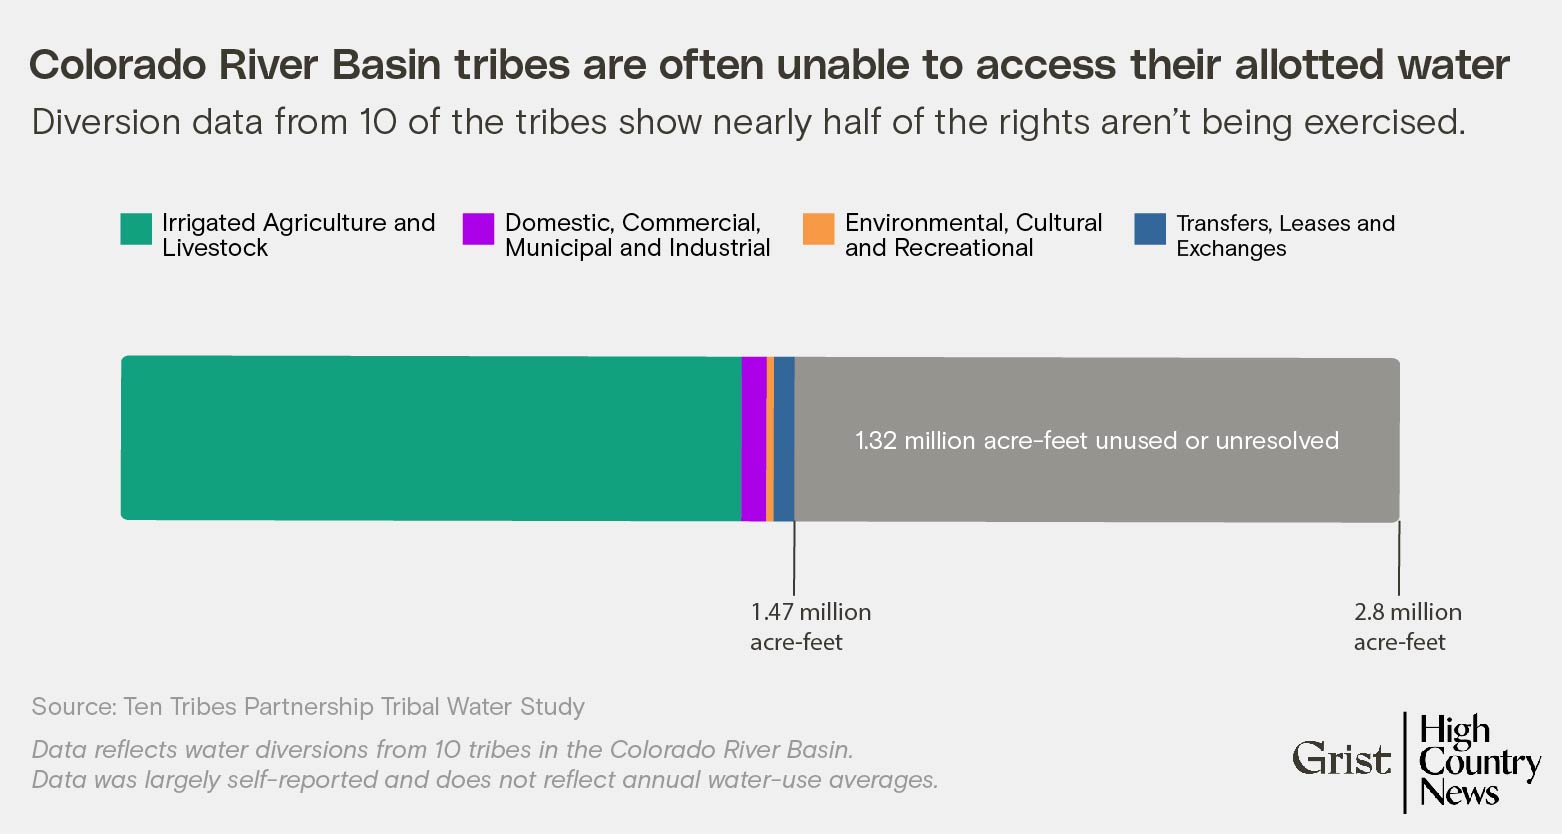 Horizontal stacked bar chart showing water diversions among one third of the tribes in the Colorado River Basin.